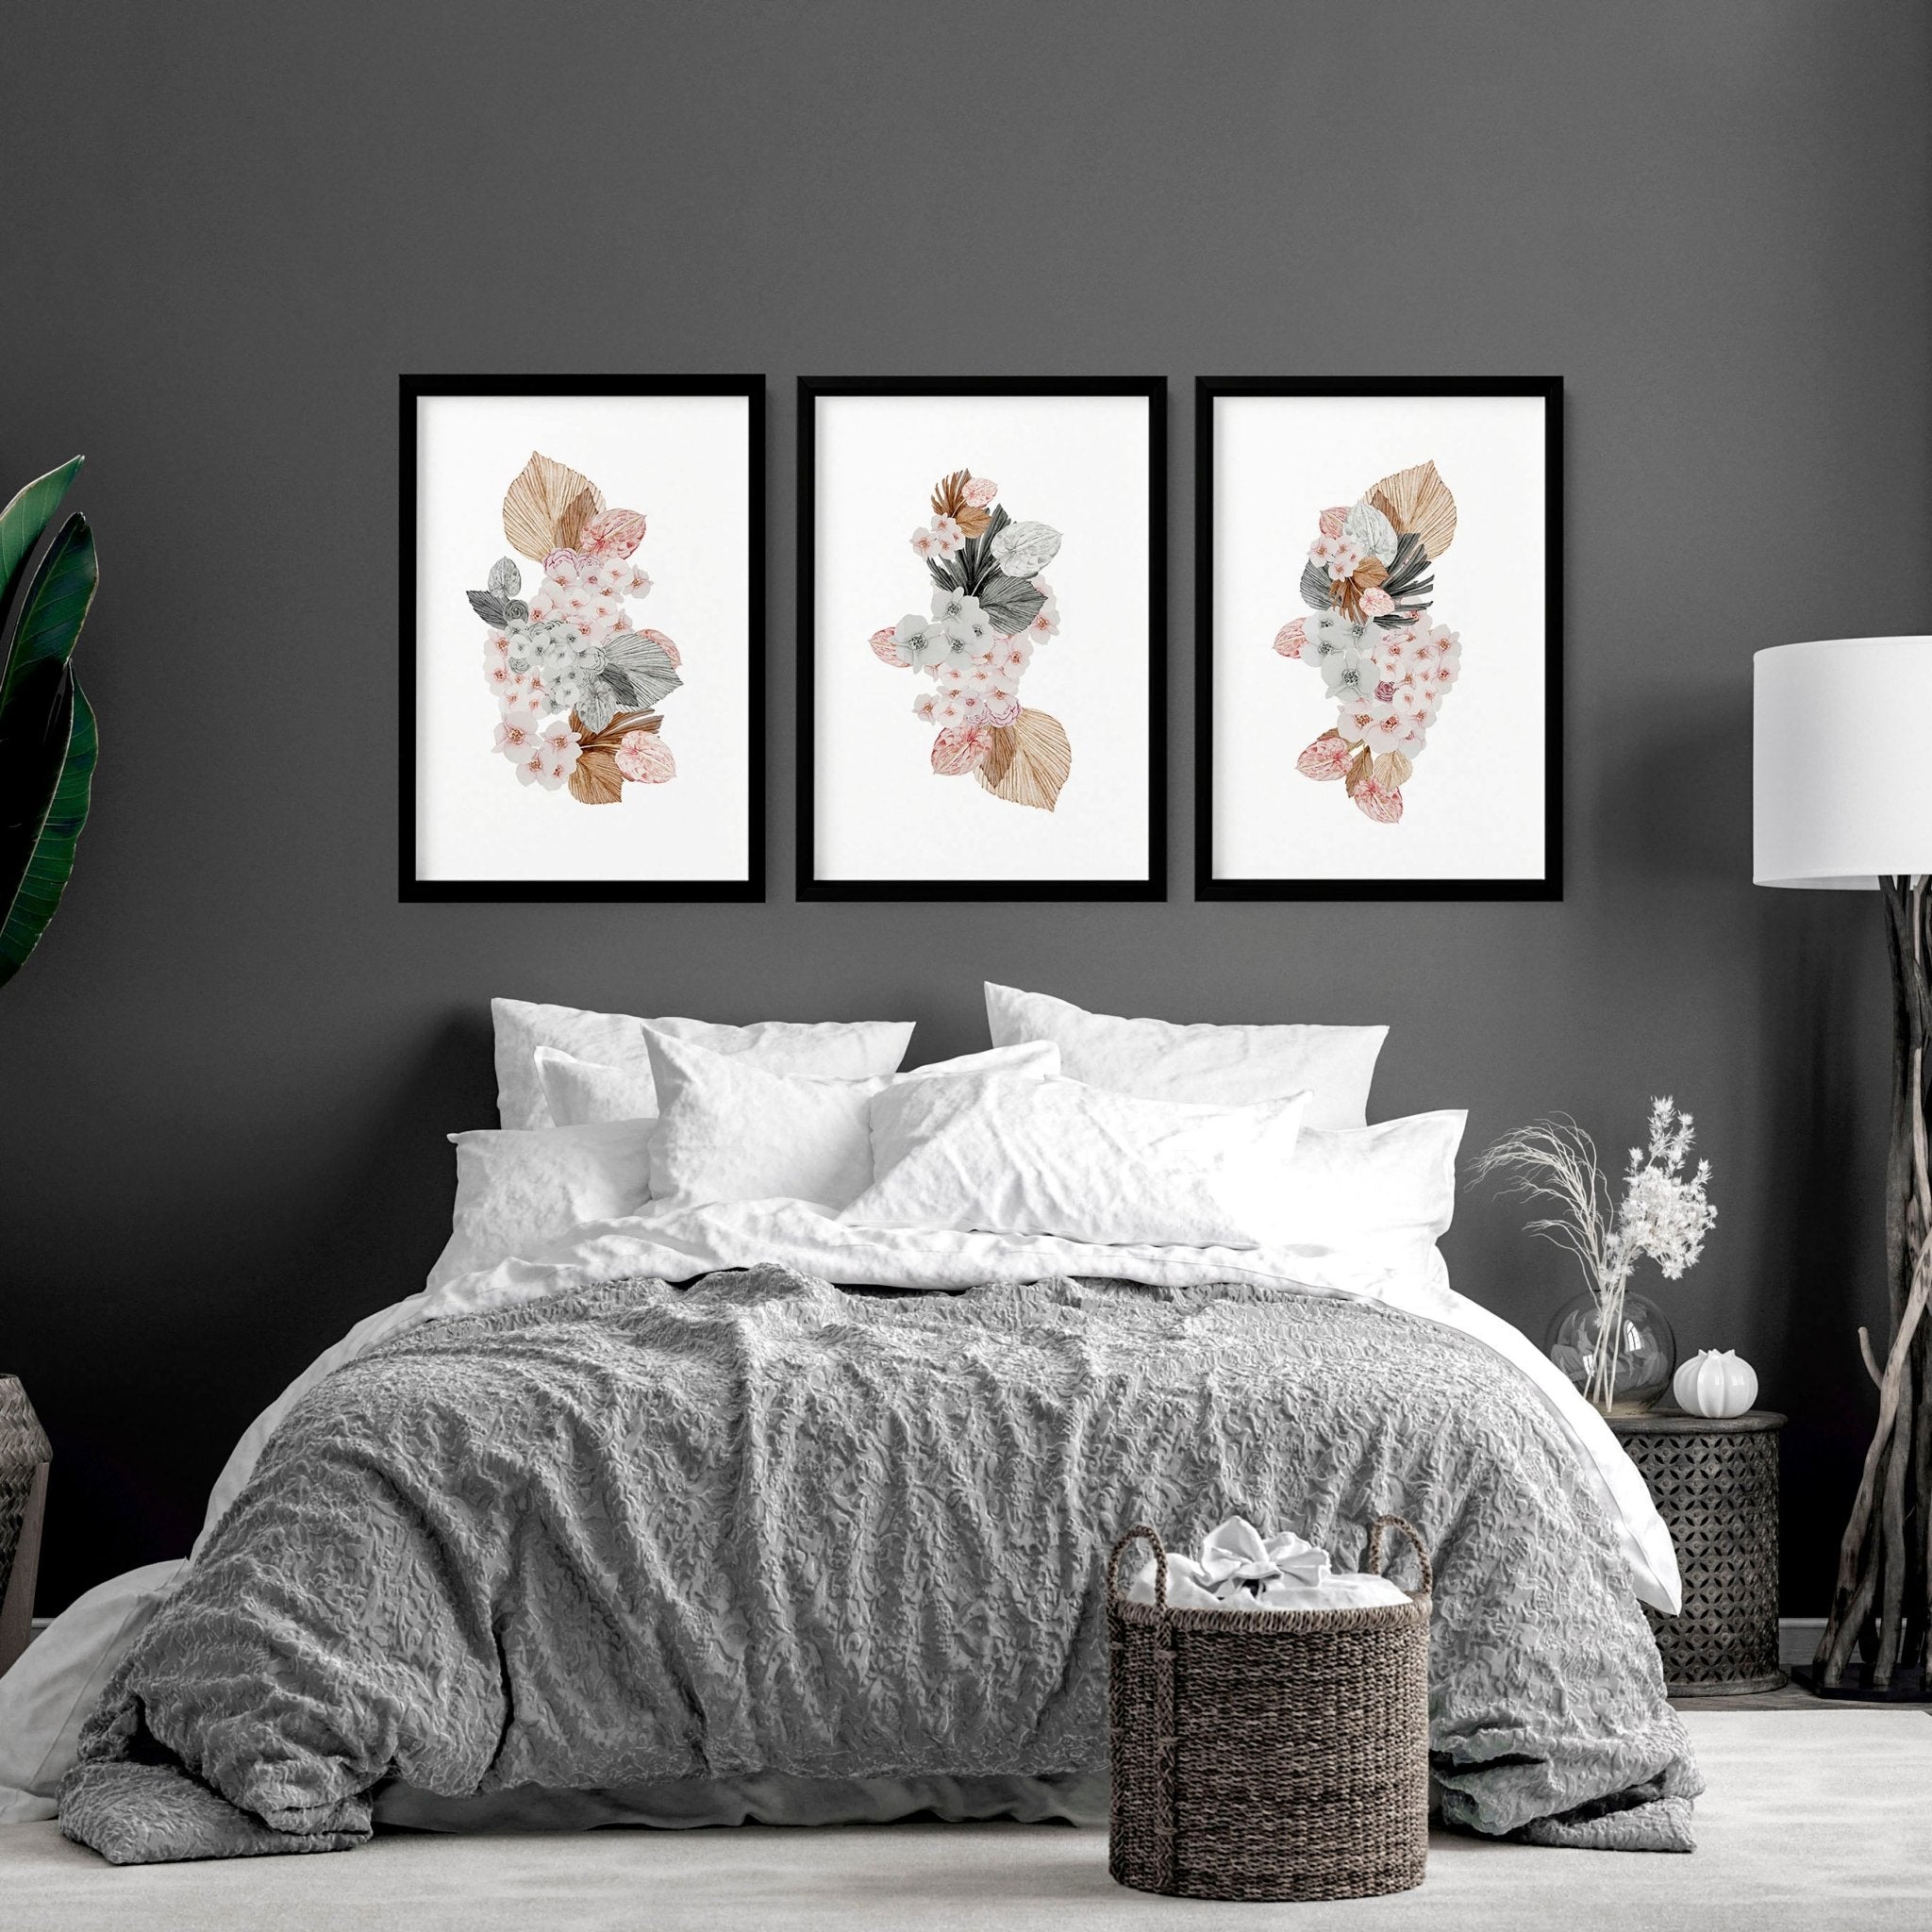 Shabby chic bedroom | set of 3 wall art prints - About Wall Art